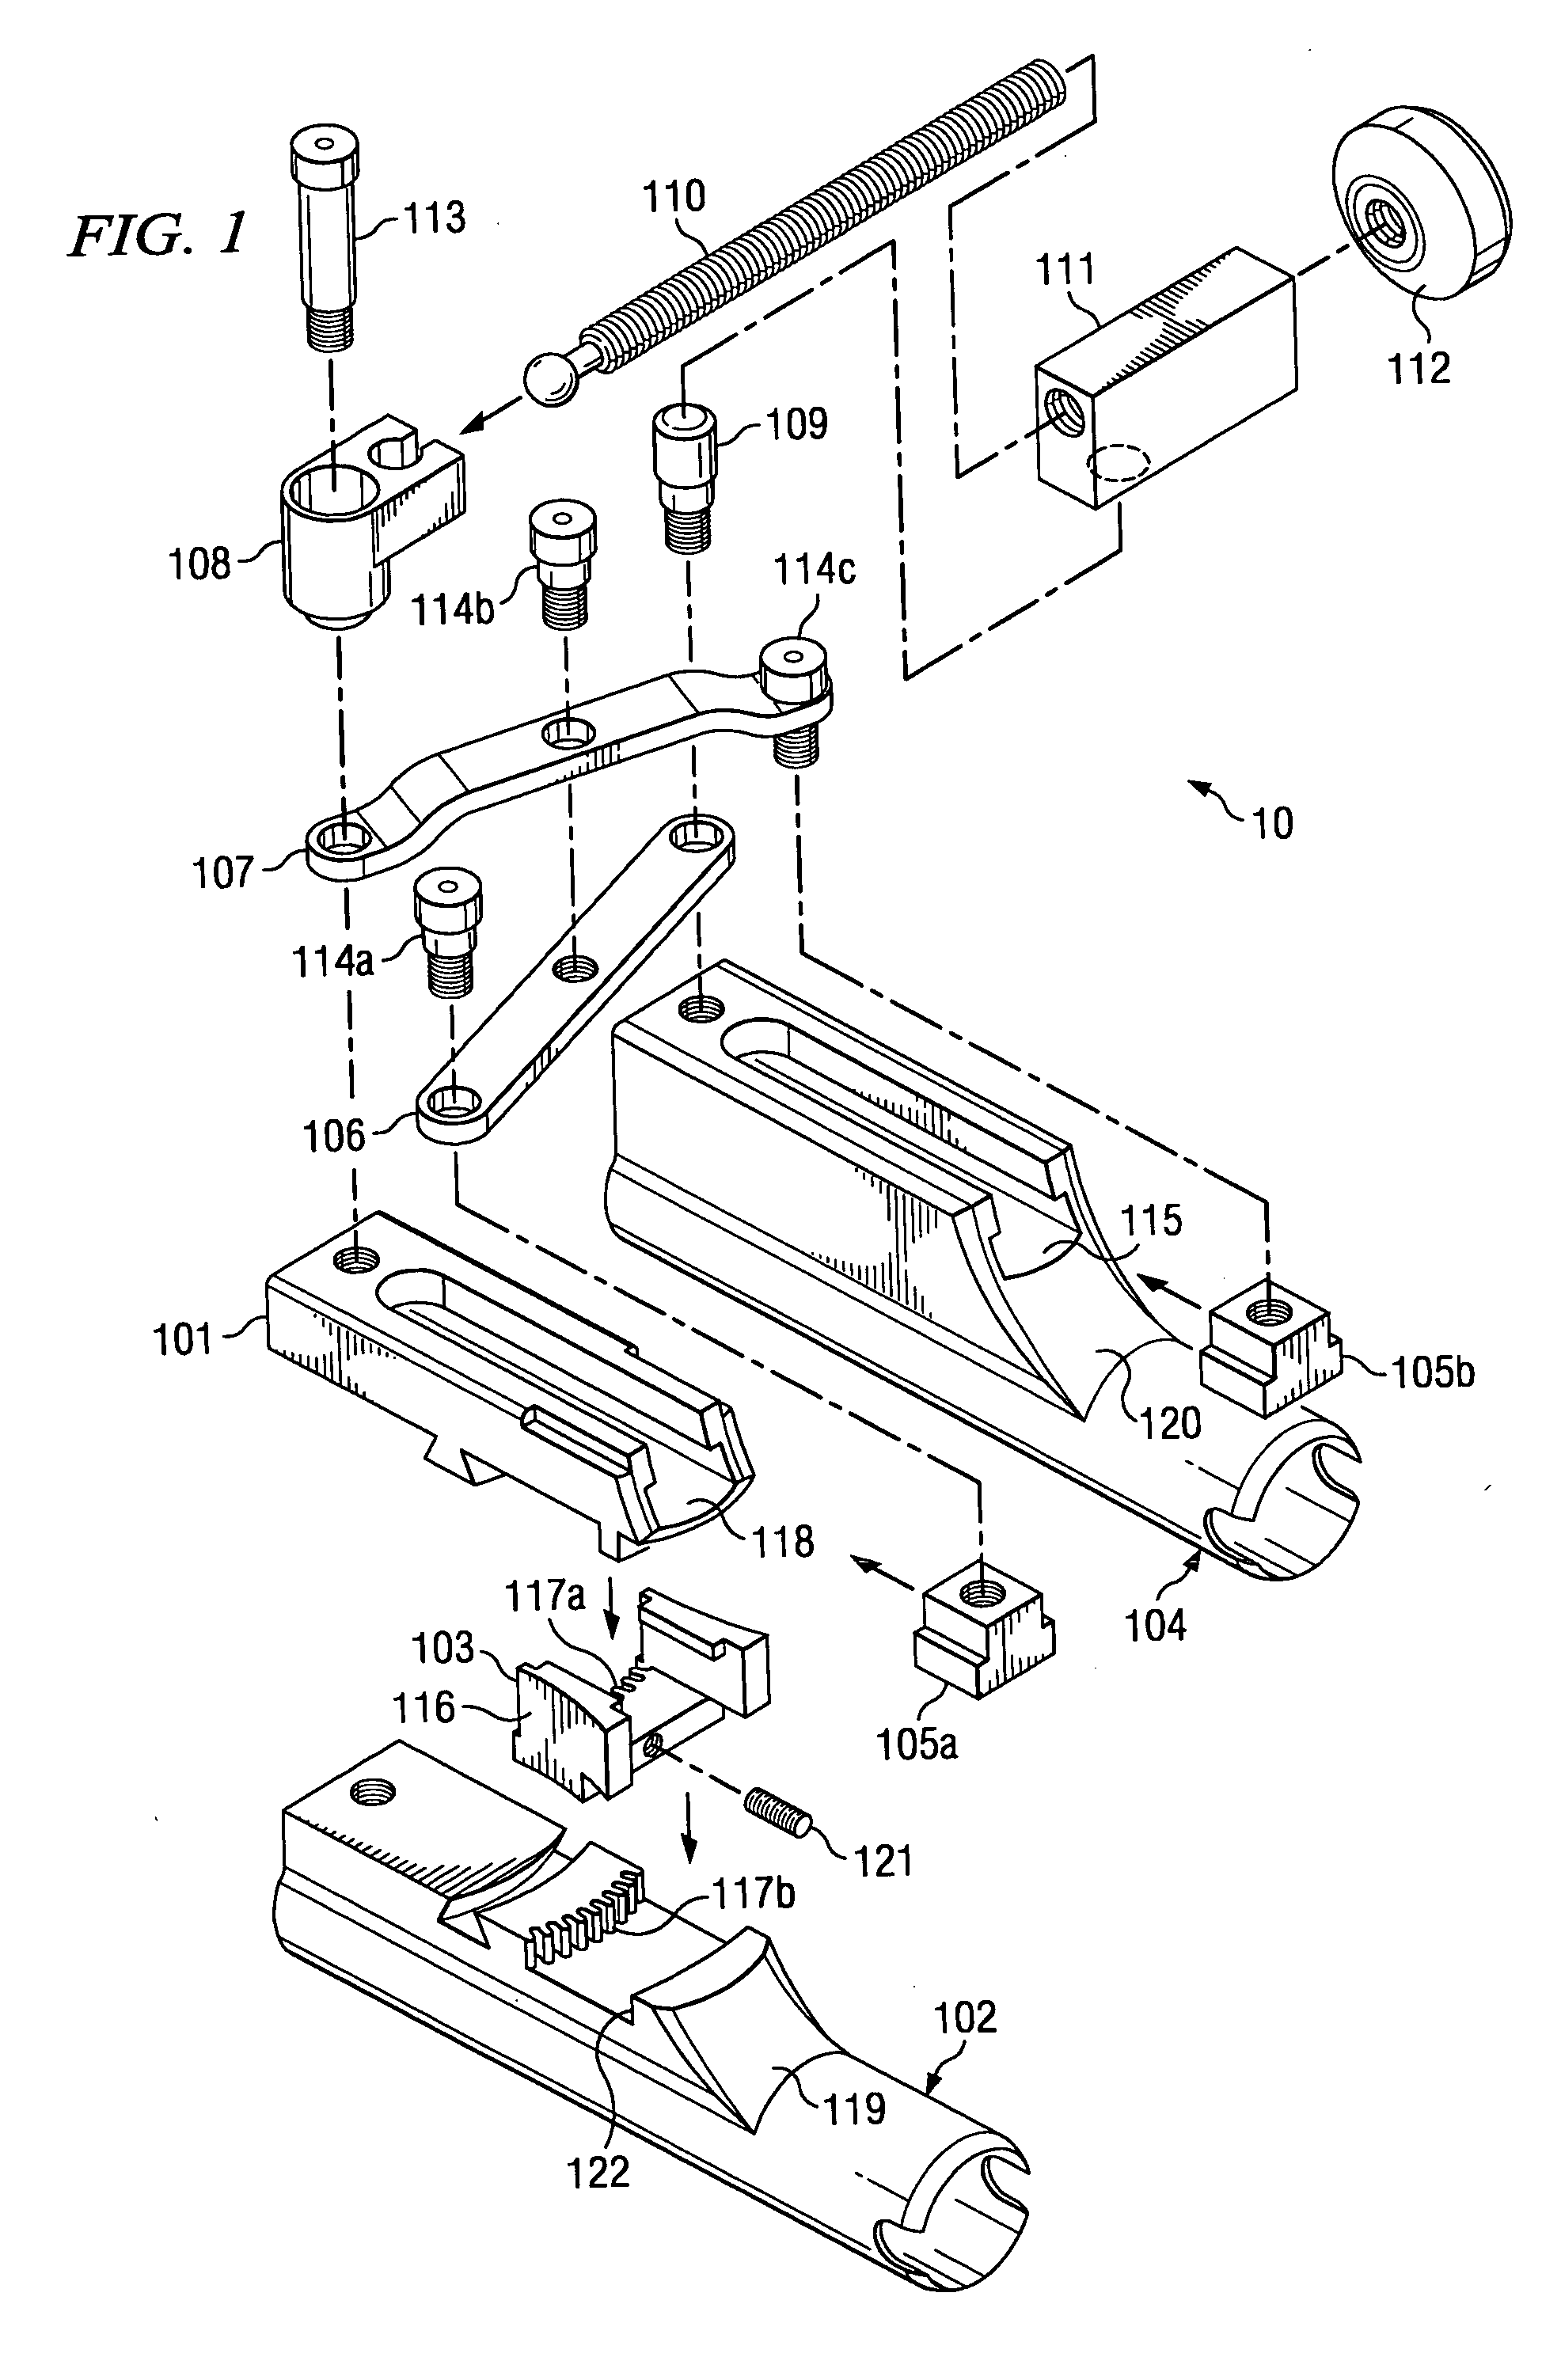 System and method for displacement of bony structures